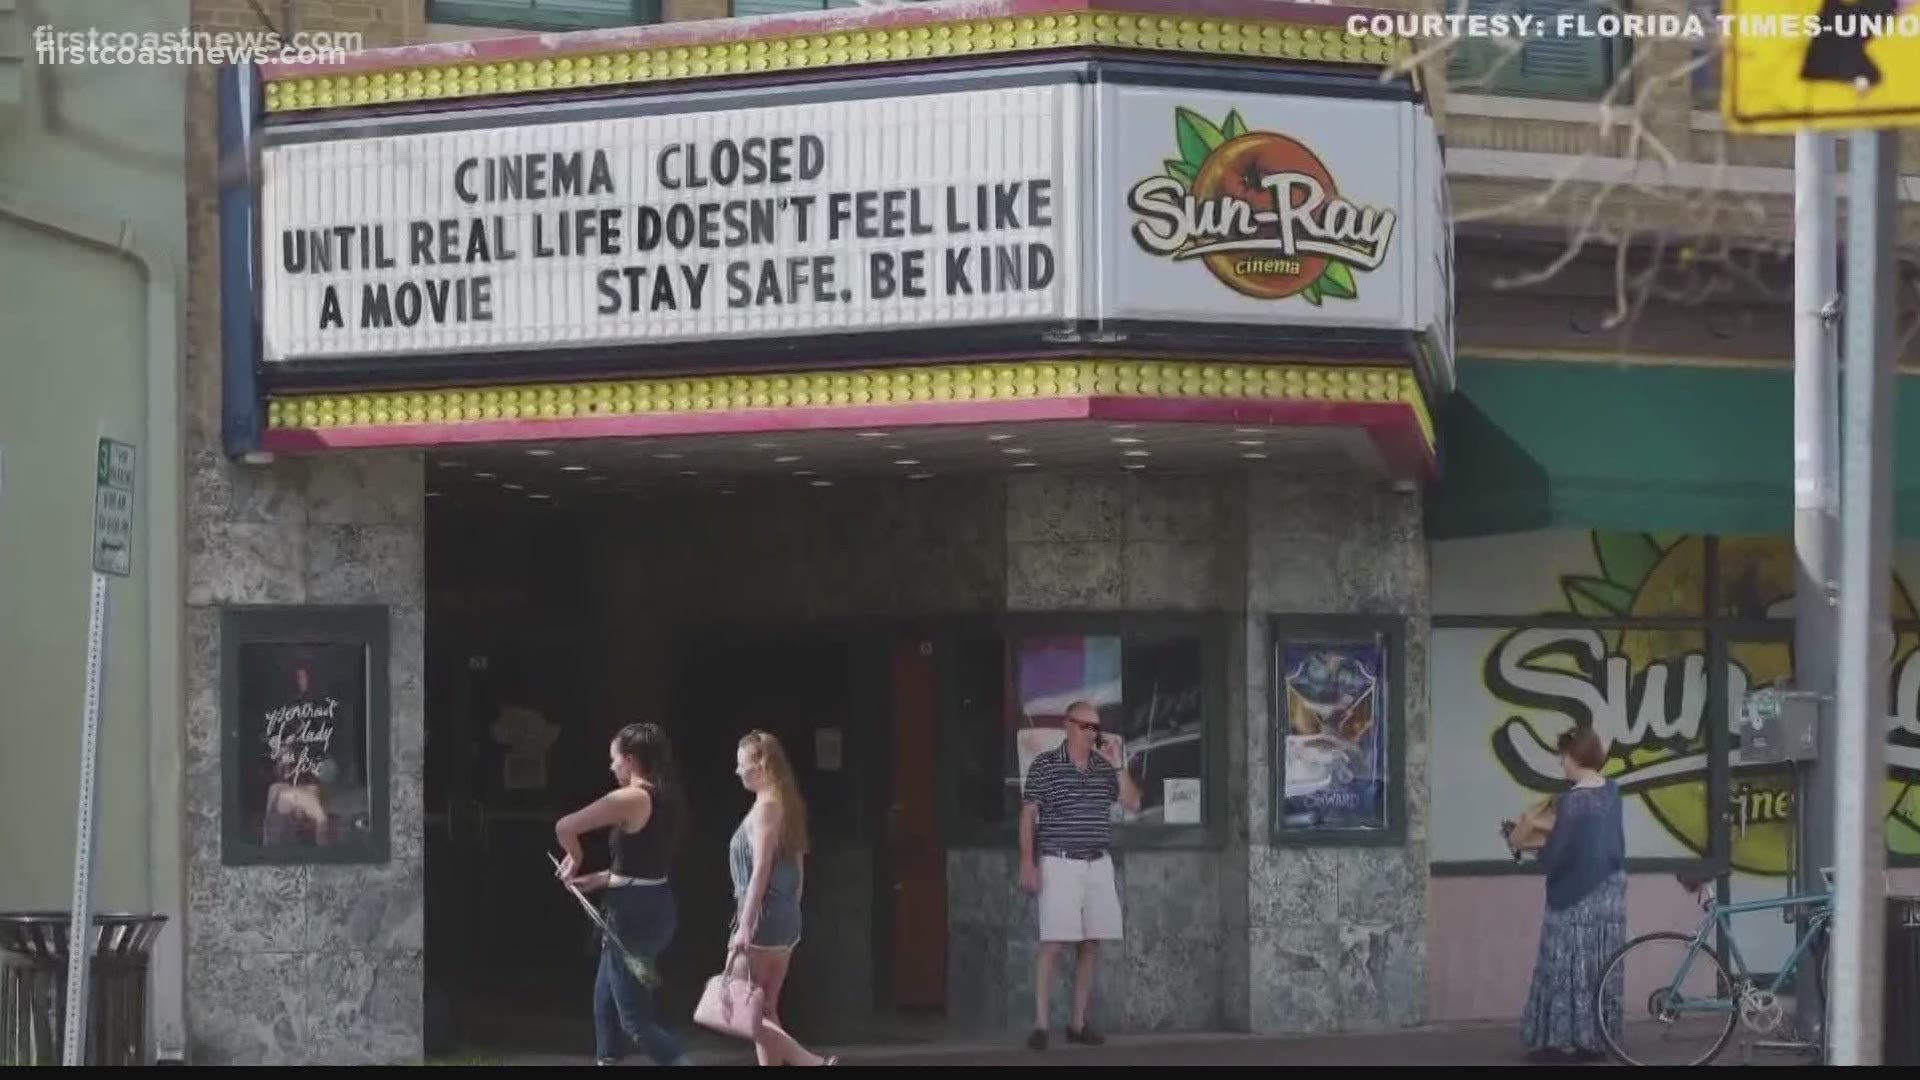 Many businesses have reinvented themselves during the pandemic to stay afloat, and the owners of Sun-Ray Cinema have gone above and beyond that calling.